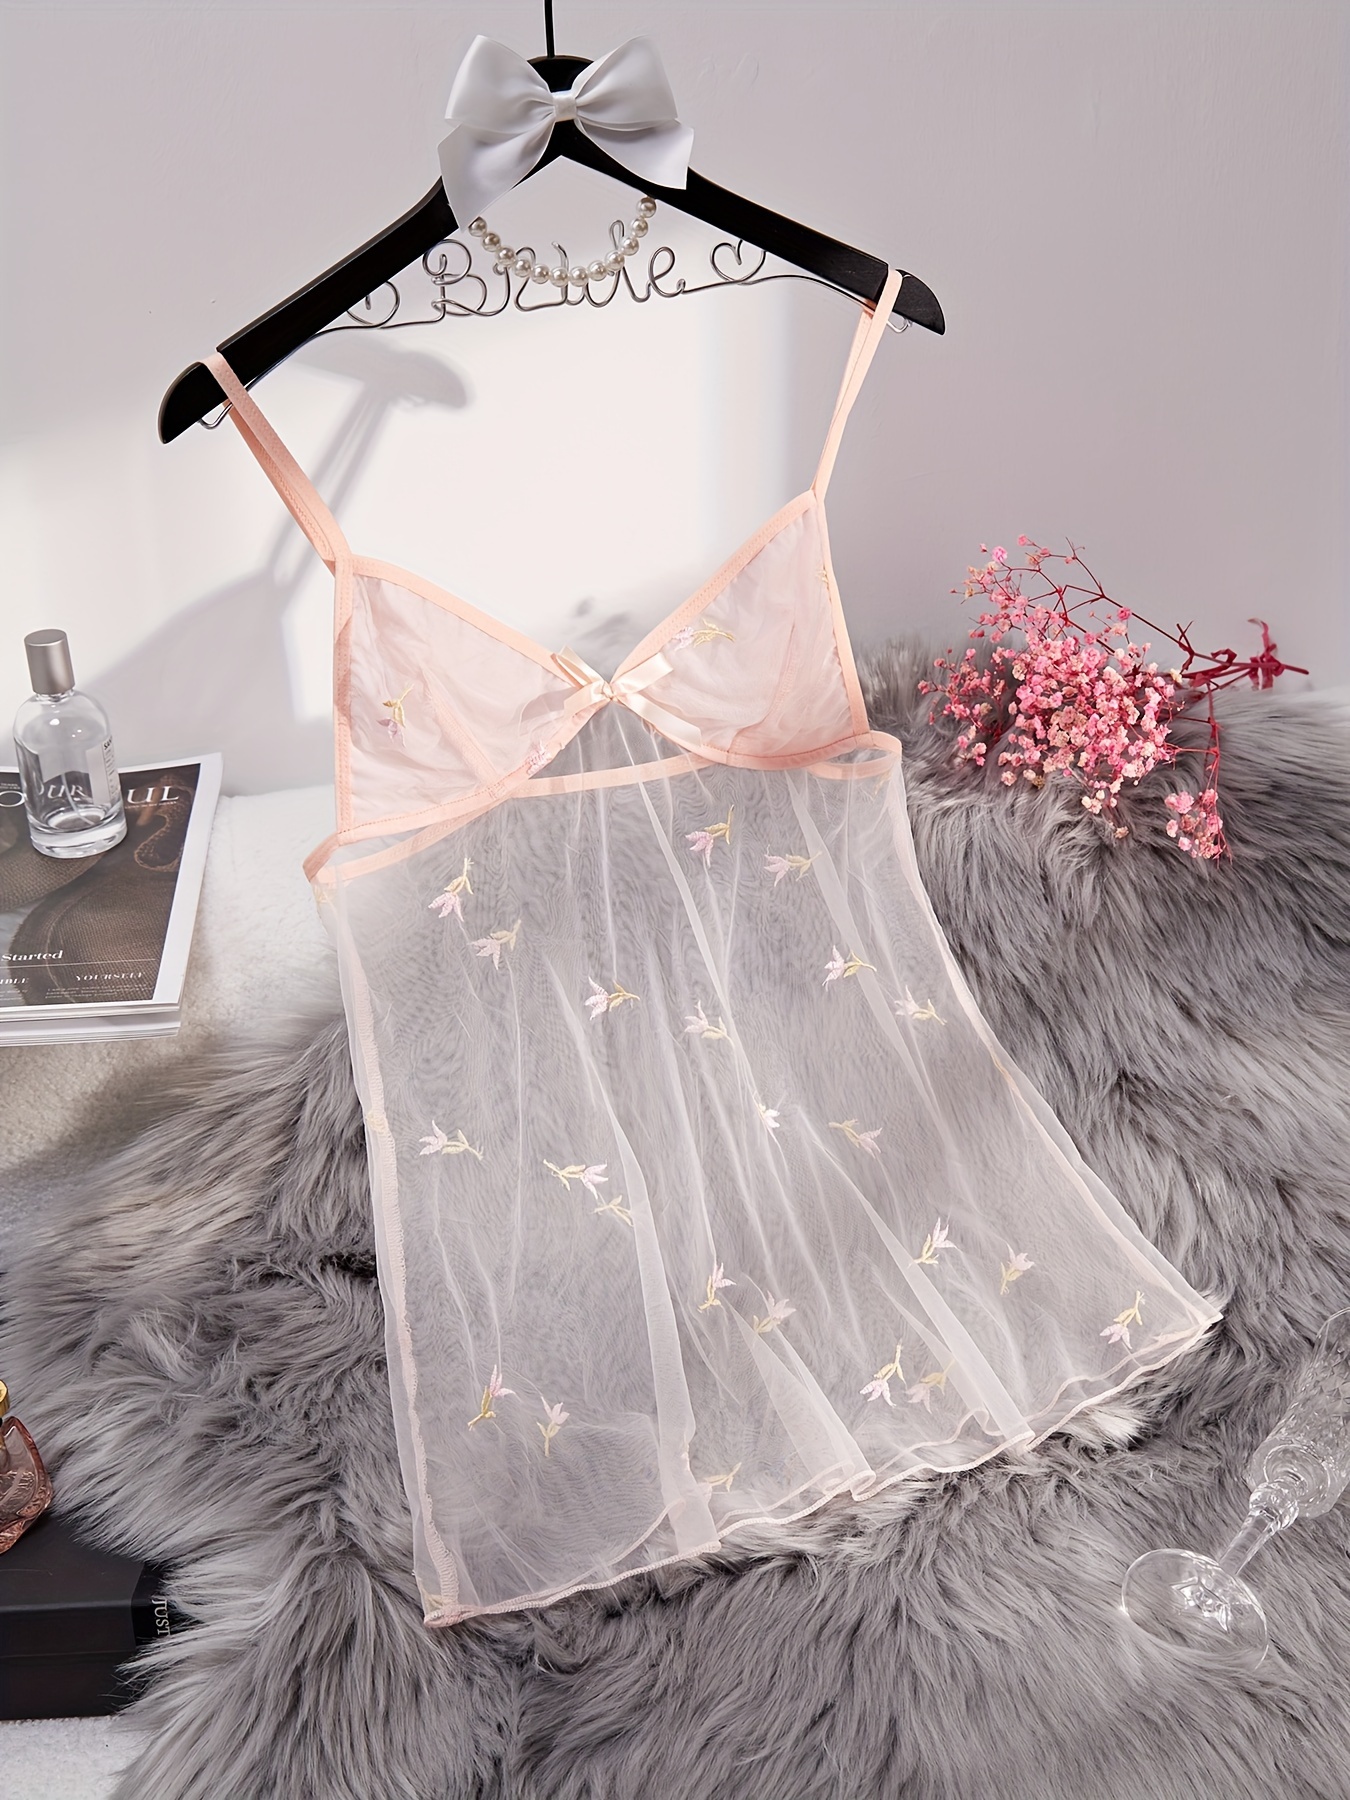 Women Floral Lace Nightgown Sheer See Through V Neck Night Dress